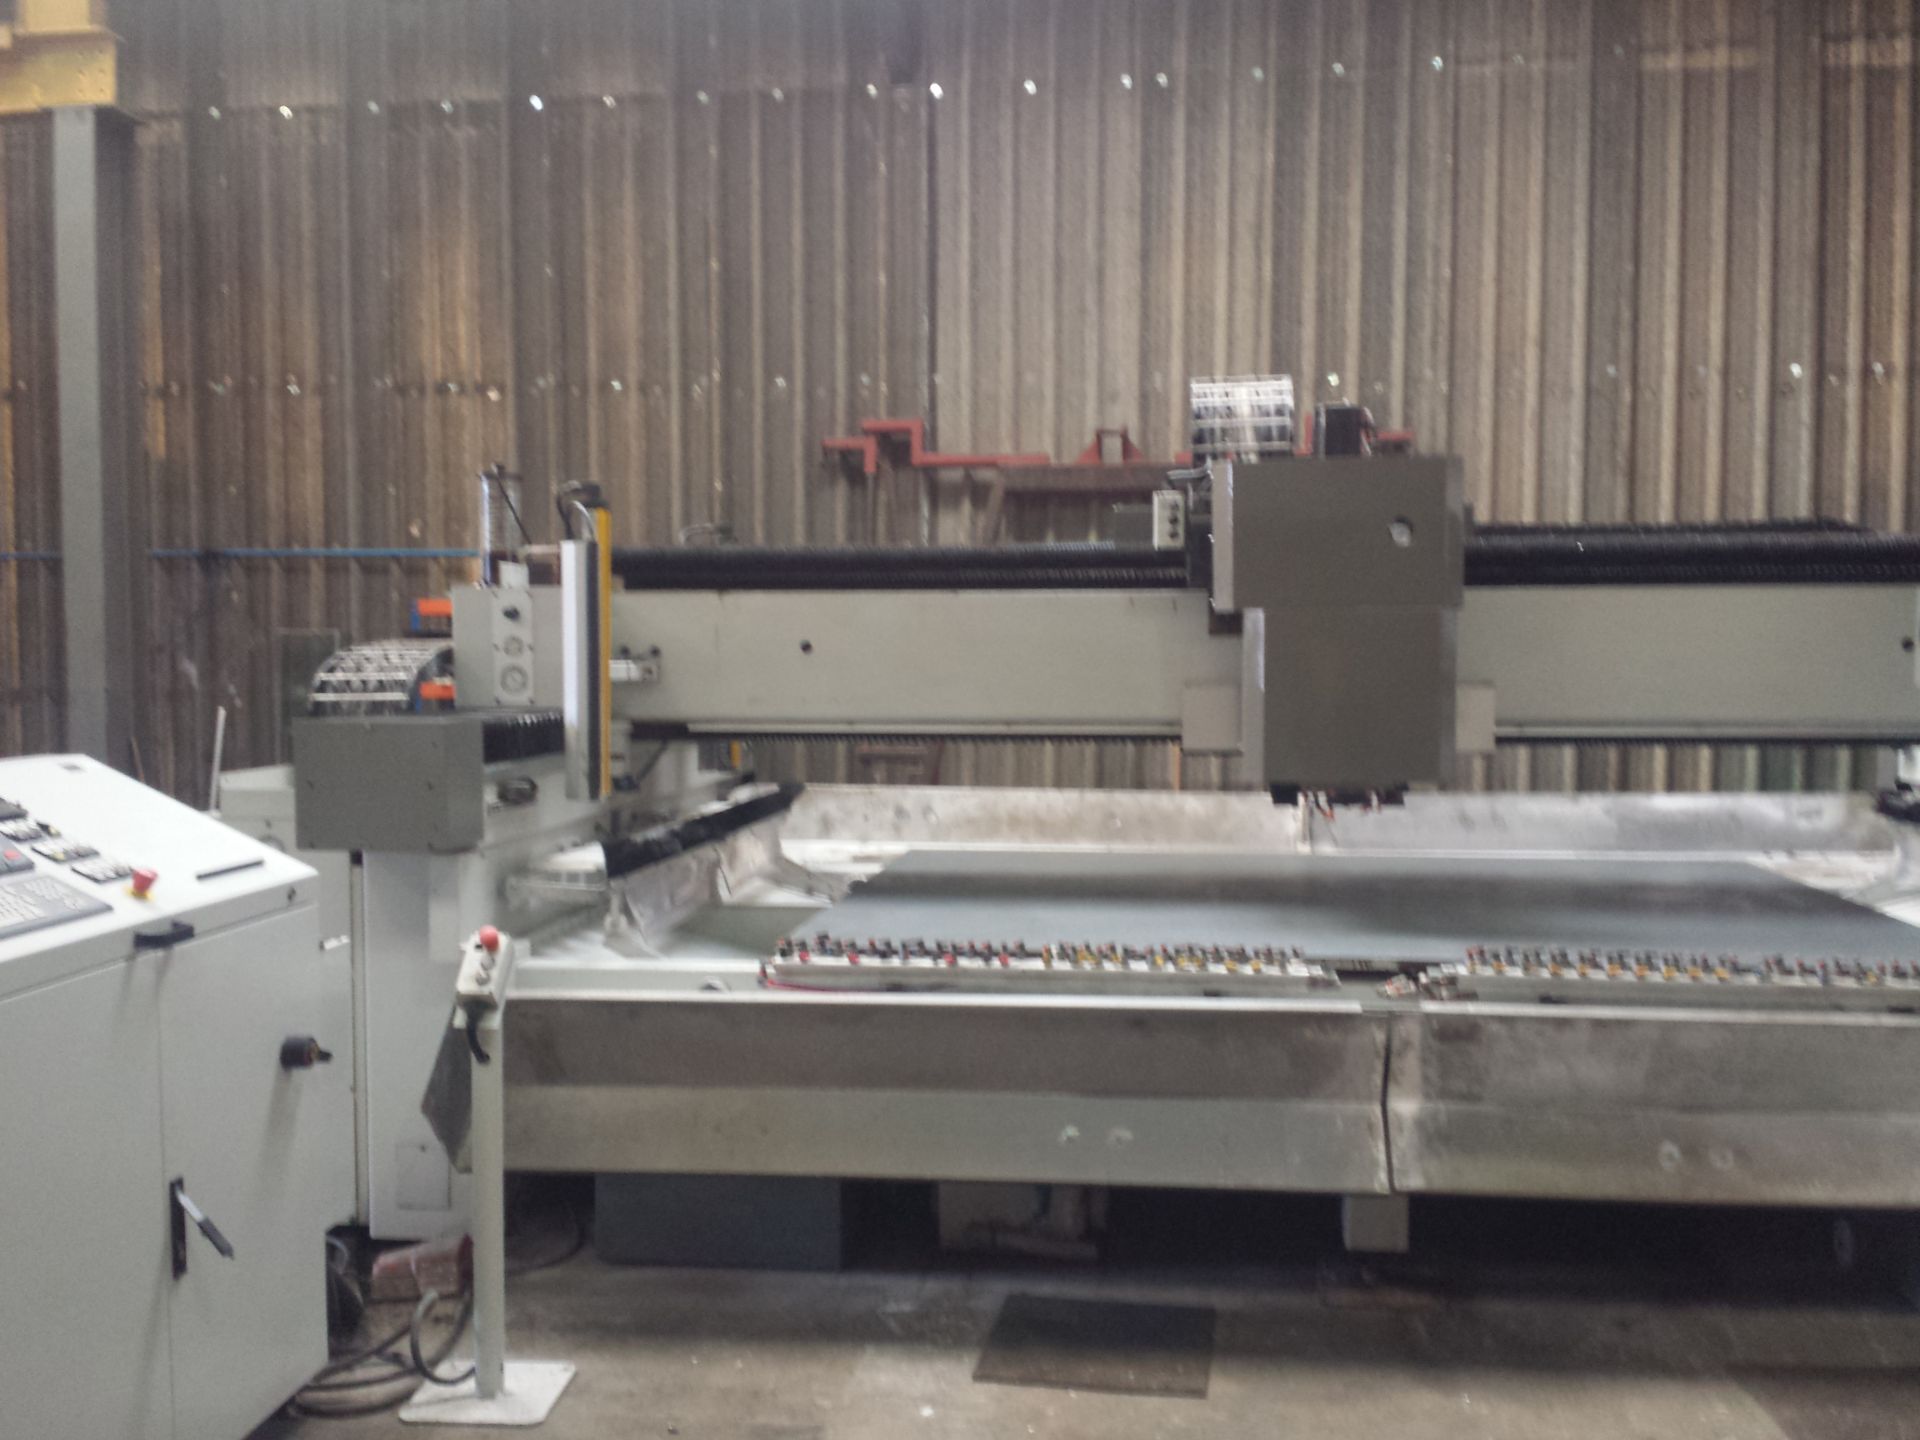 Intermac Master Edge 2300 CNC Edging Machine 3000 x 2300 Bed Size with S10 Numerical Control Unit, - Image 3 of 4